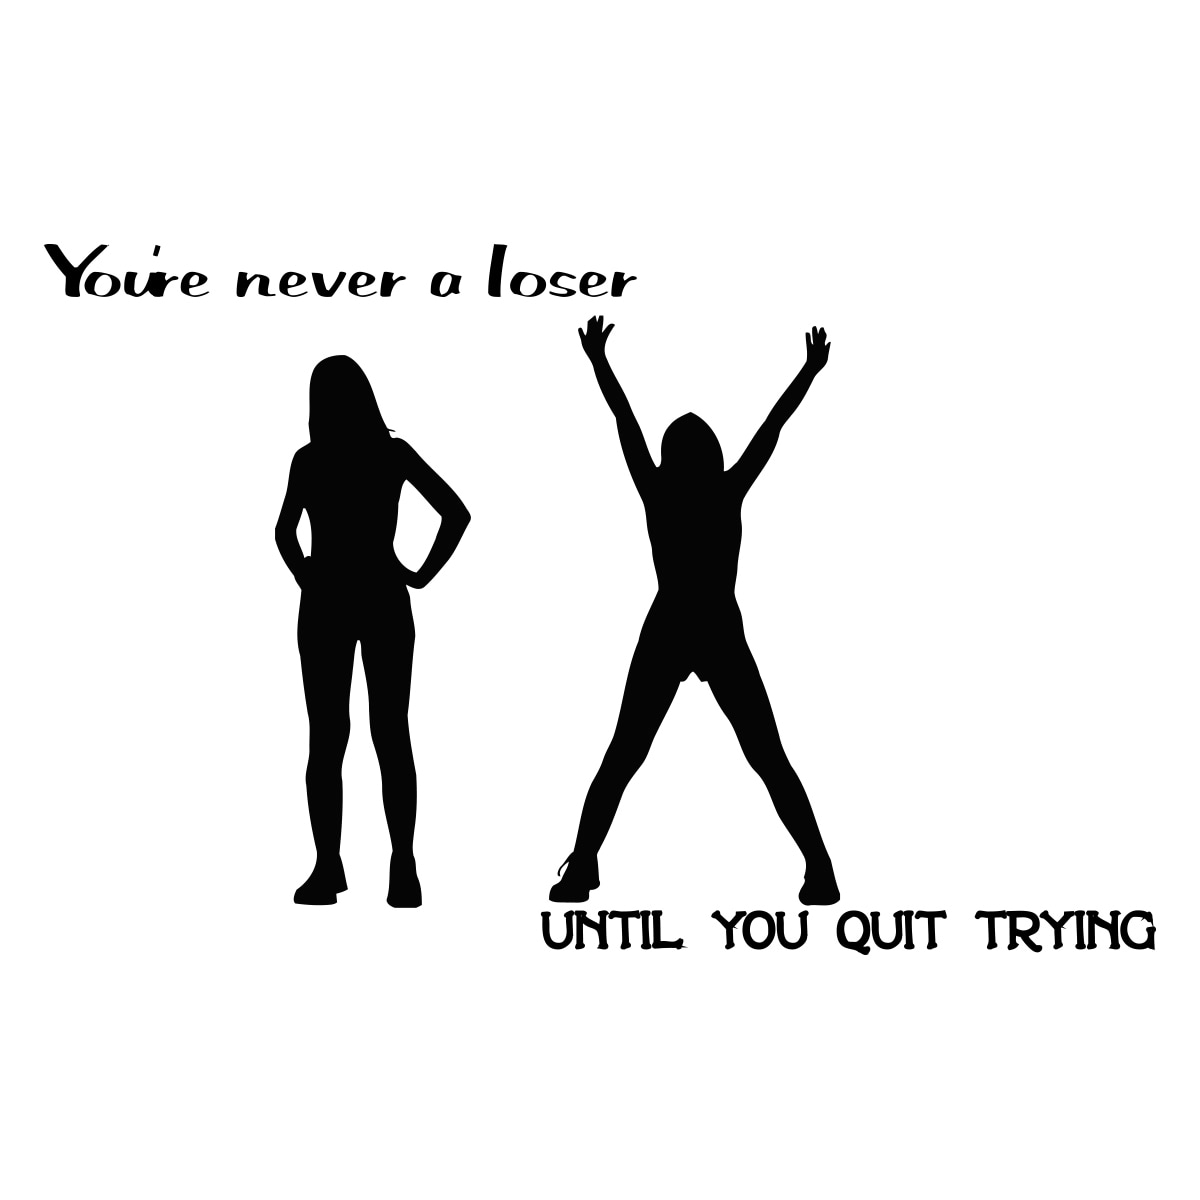 Sport Quote Youre Never A Loser Black Vinyl Wall Decal Sticker (BlackTheme Youre never a loser until you quit trying sport quote and girl imageEasy to applyDimensions 22 inches wide x 35 inches long )